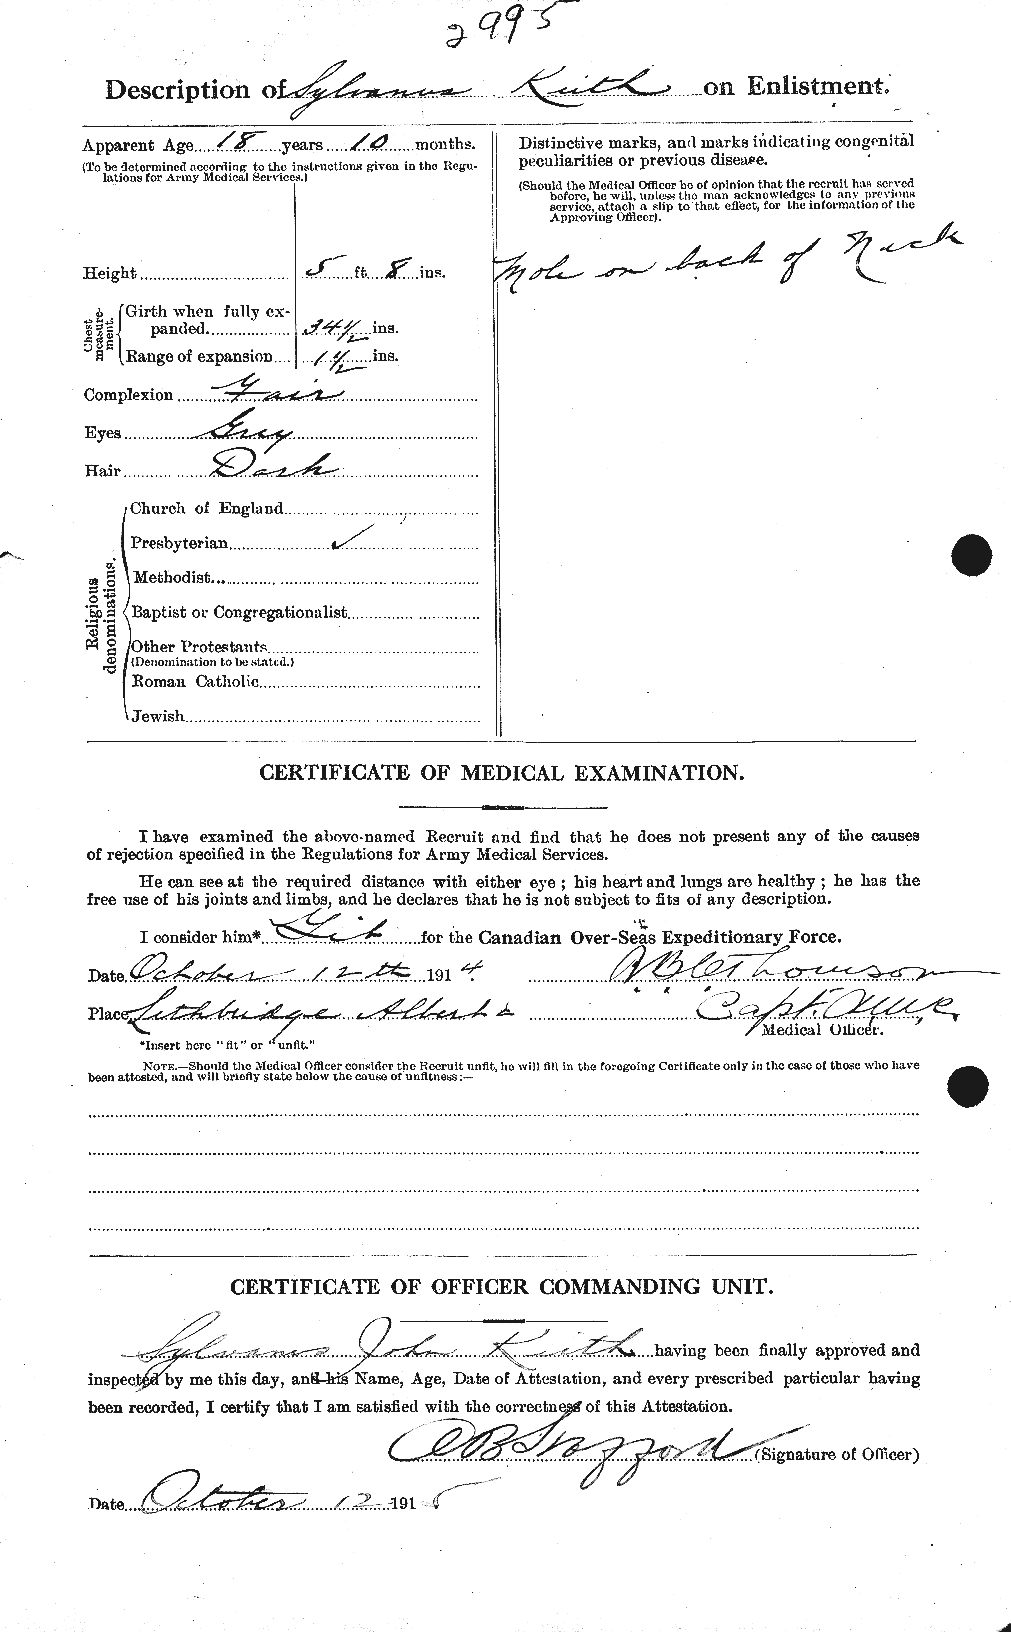 Personnel Records of the First World War - CEF 432505b